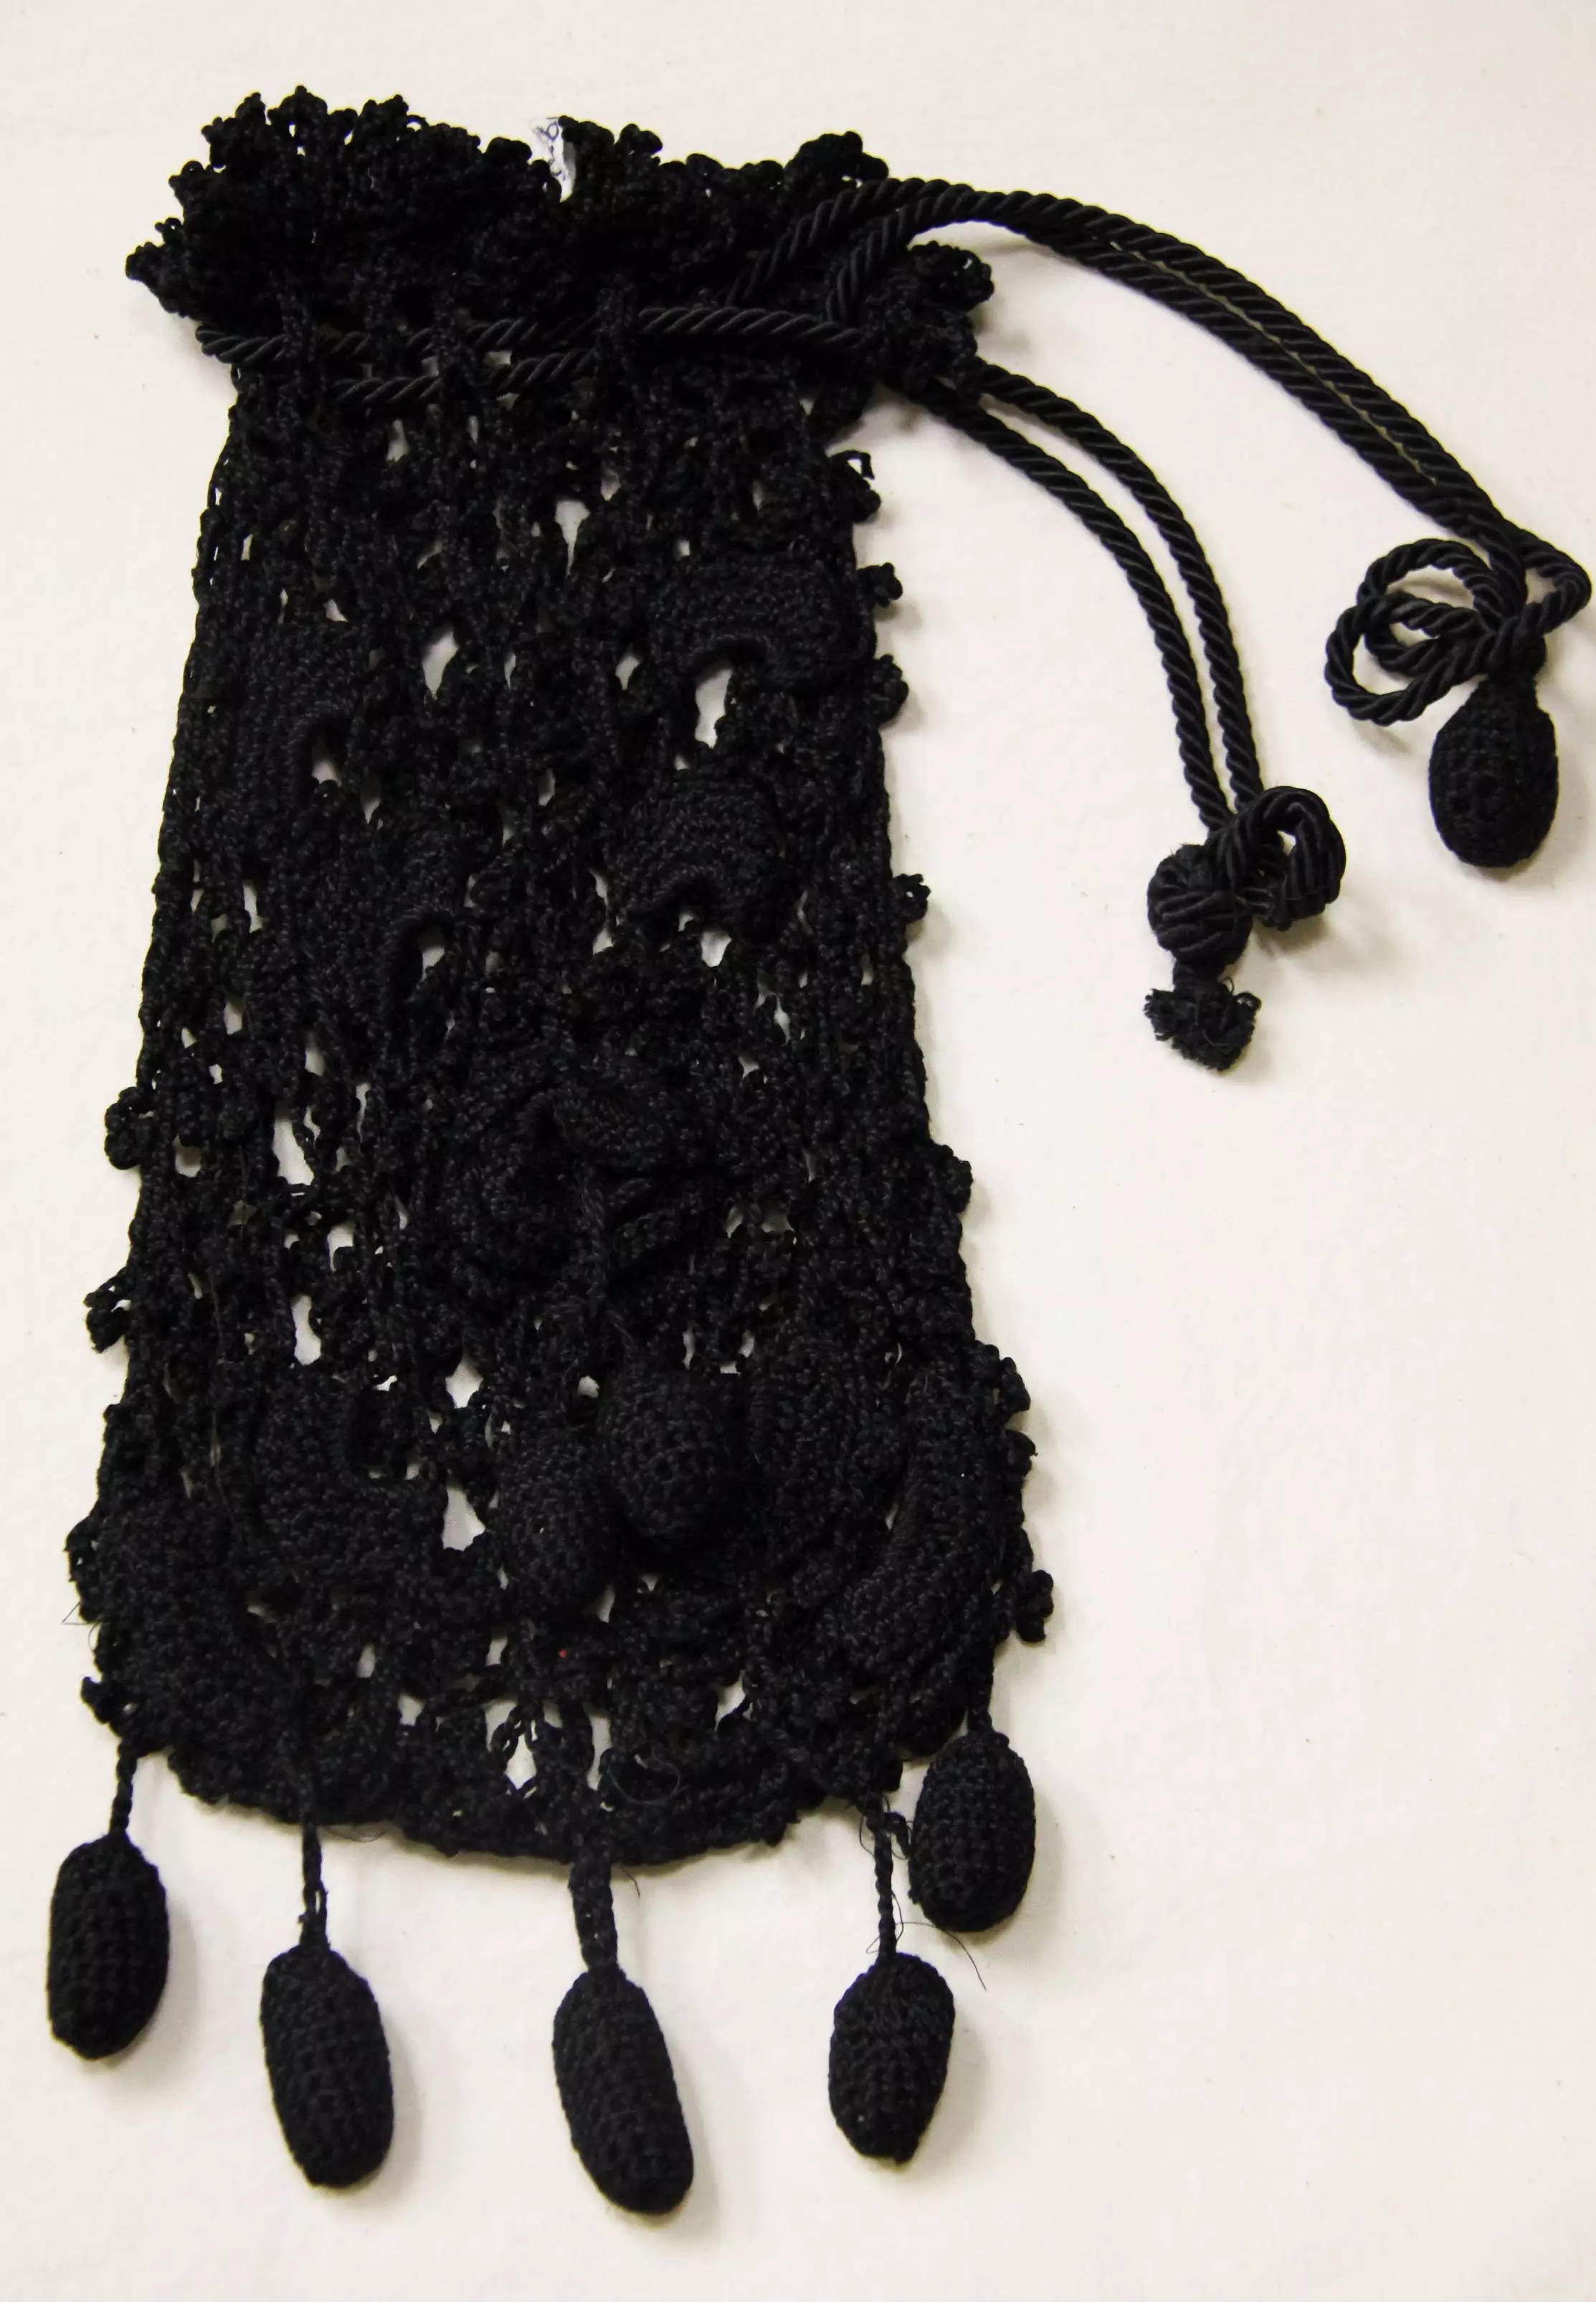 Black pouch with drawstring closure. Fringe hangs from the bottom.